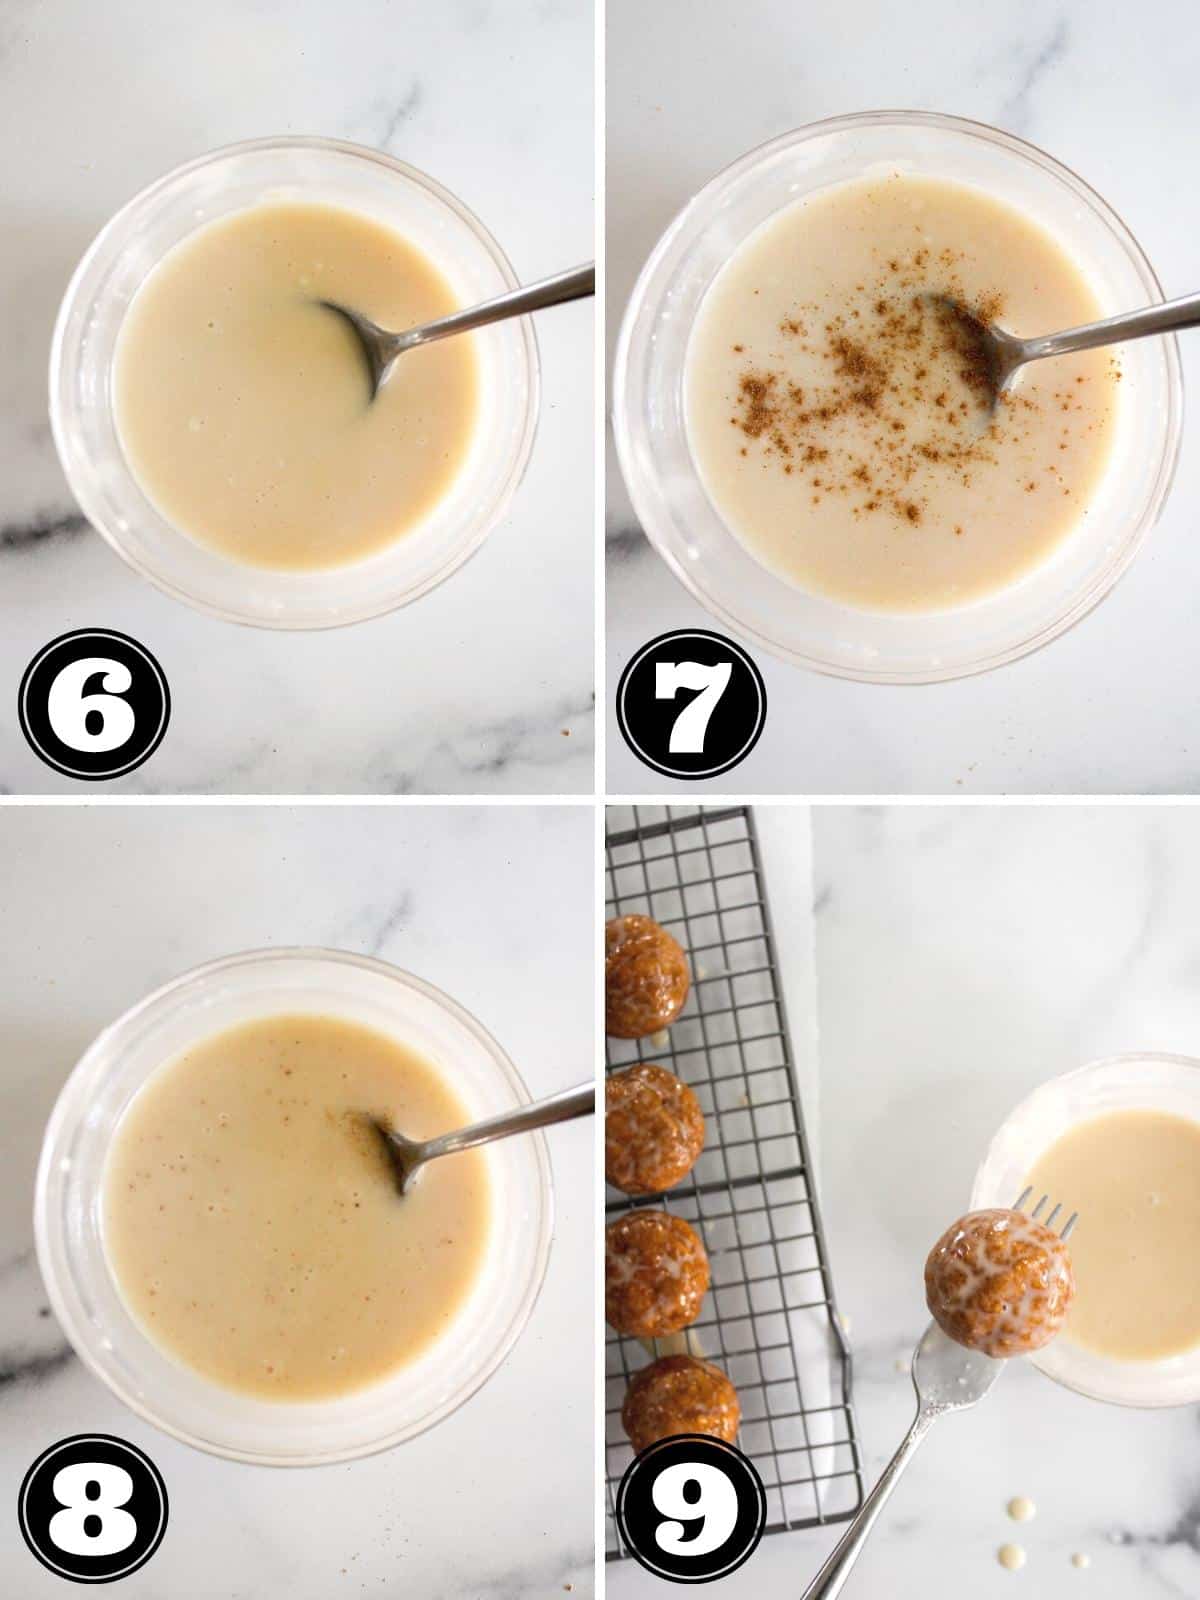 Collage image showing steps to make pumpkin donut glaze and glazing a muffin.